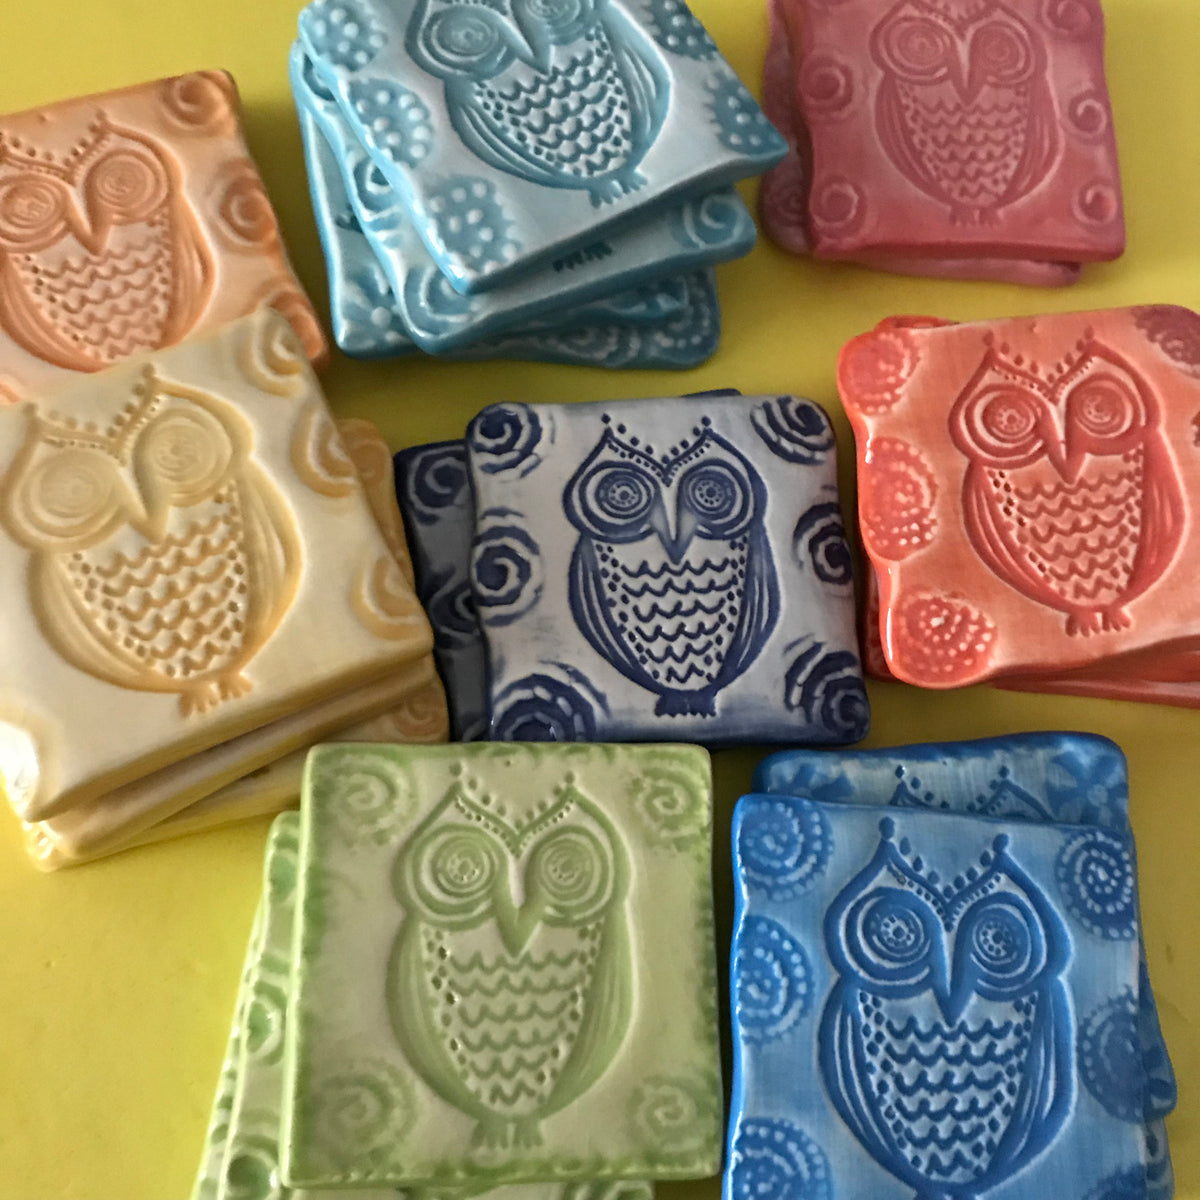 Our Owl Magnets have a unique design which was created by Lorraine Oerth.  Each magnet is 2 x 2&quot;, crafted from potter&#39;s clay, and comes in a variety of bright colors.